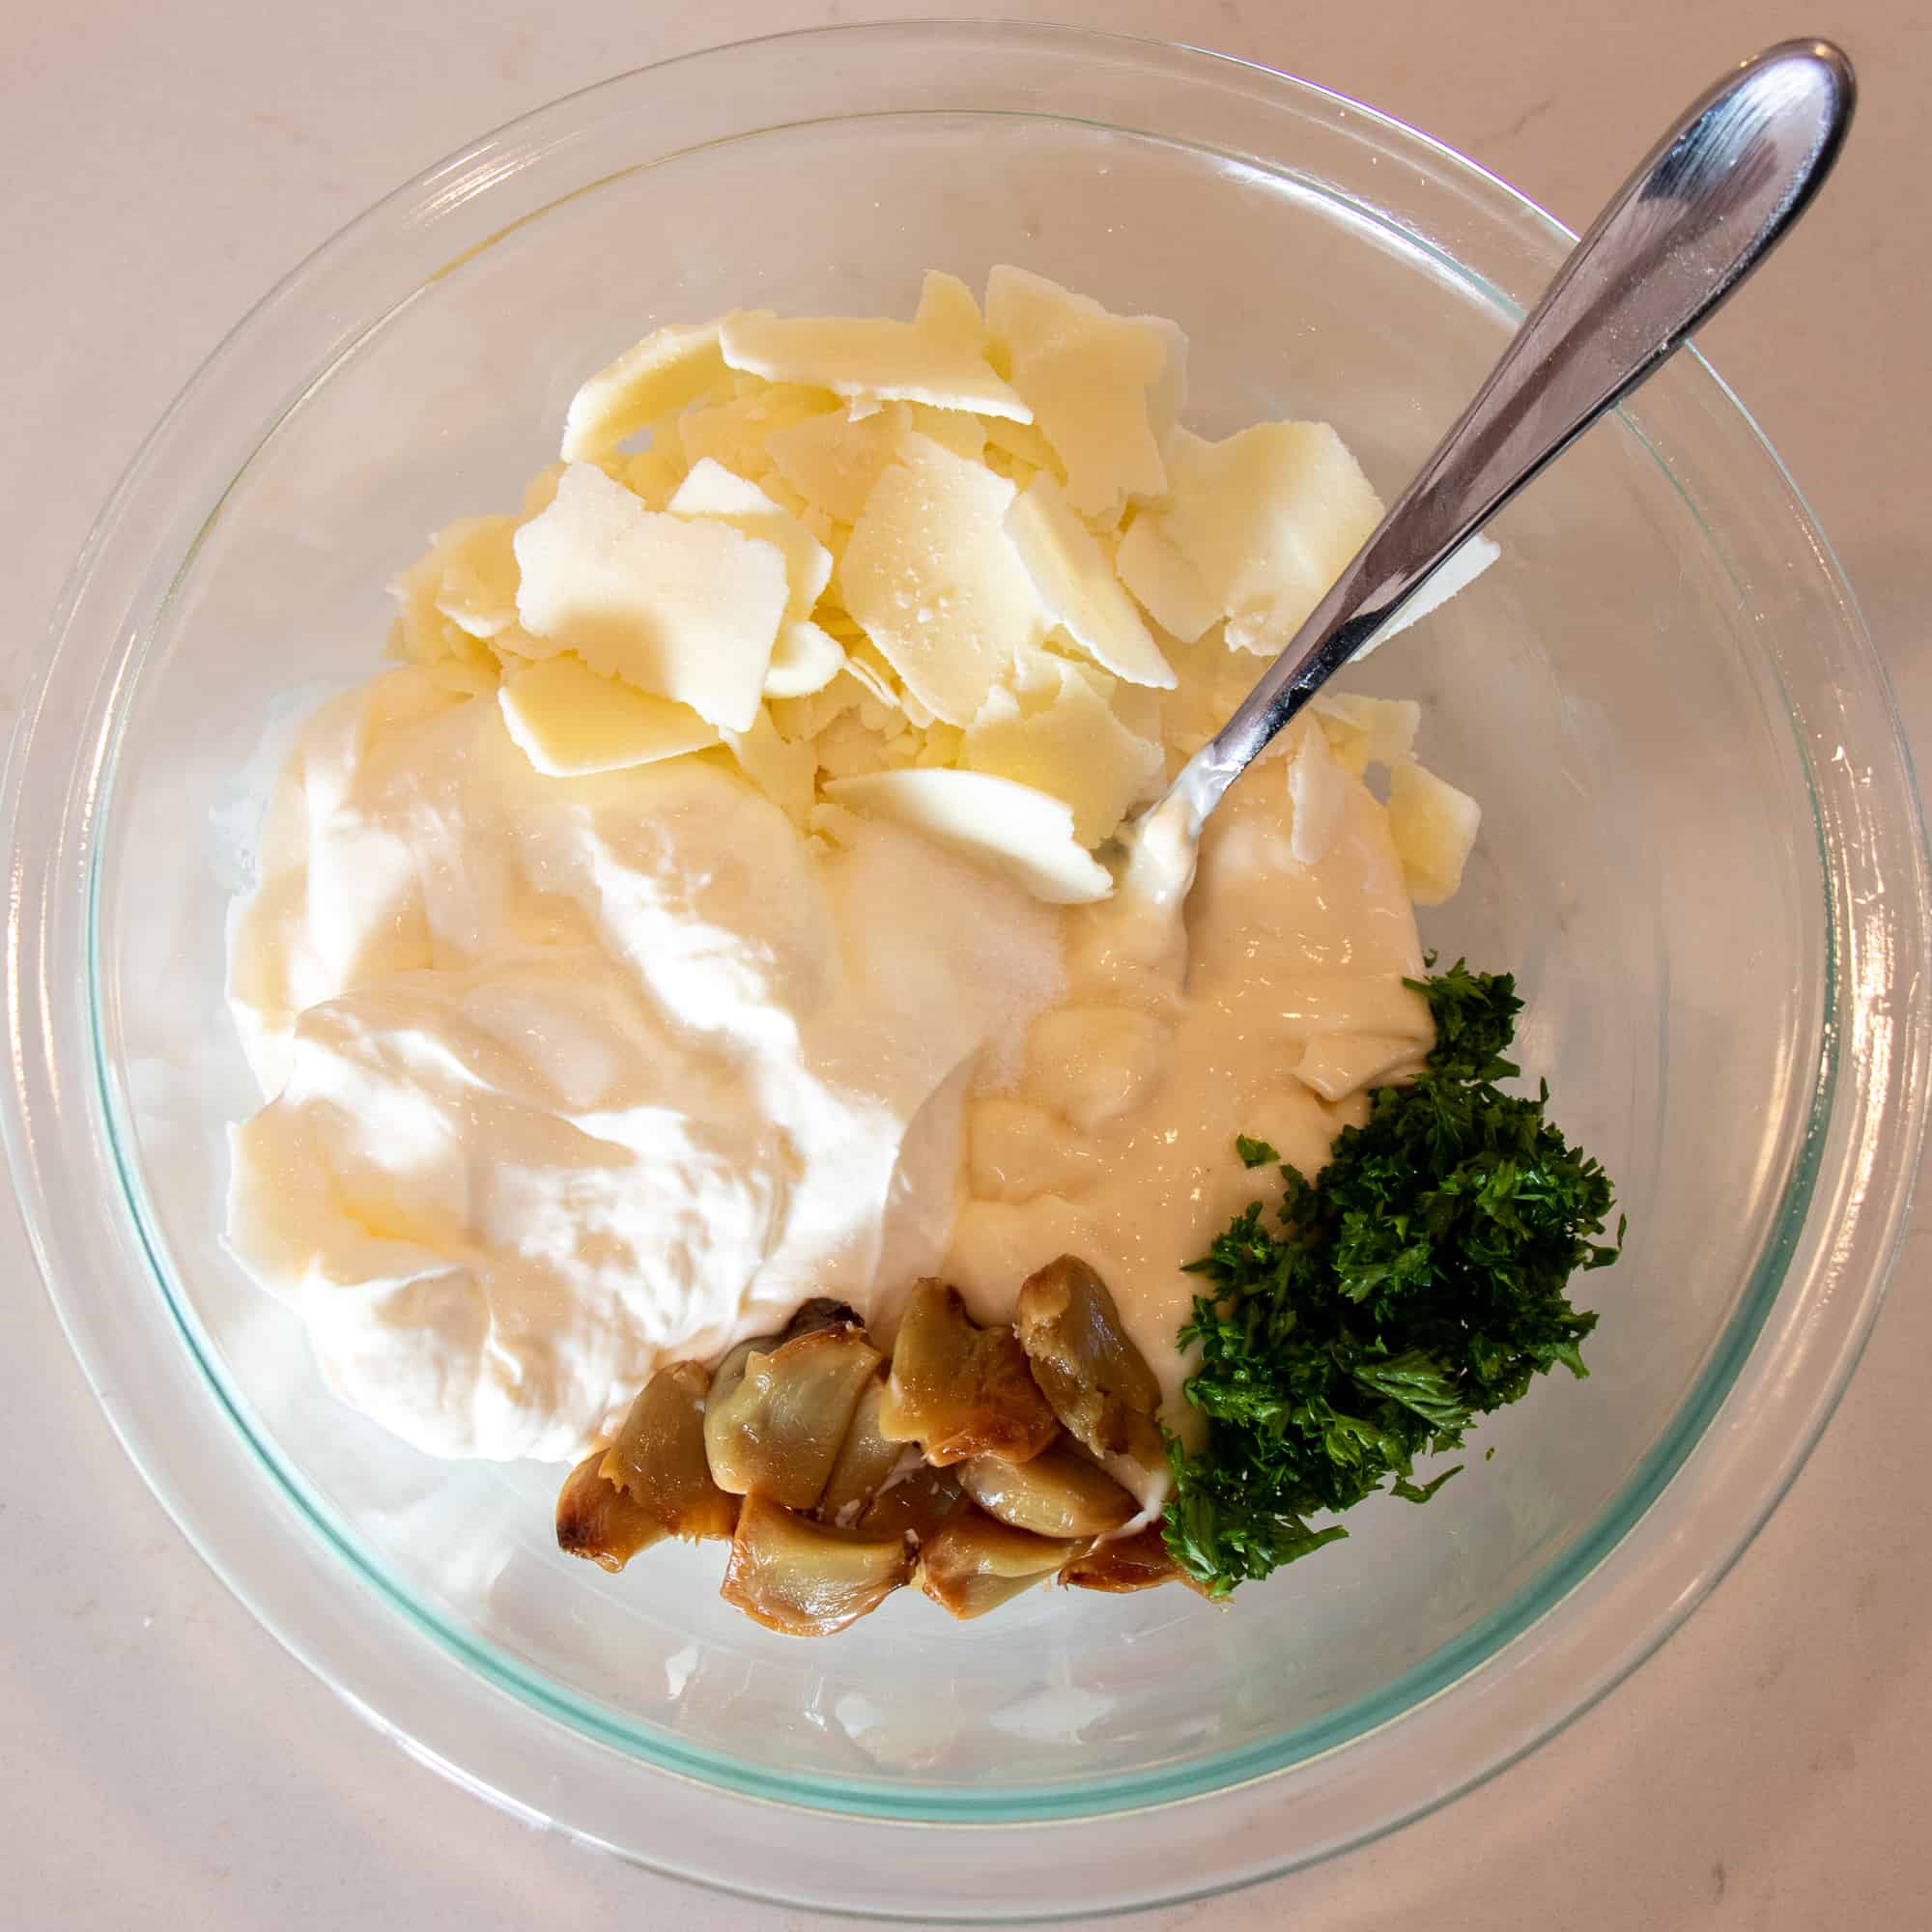 Ingredients for the dip include mayonnaise, sour cream, asiago cheese, roasted garlic and parsley.